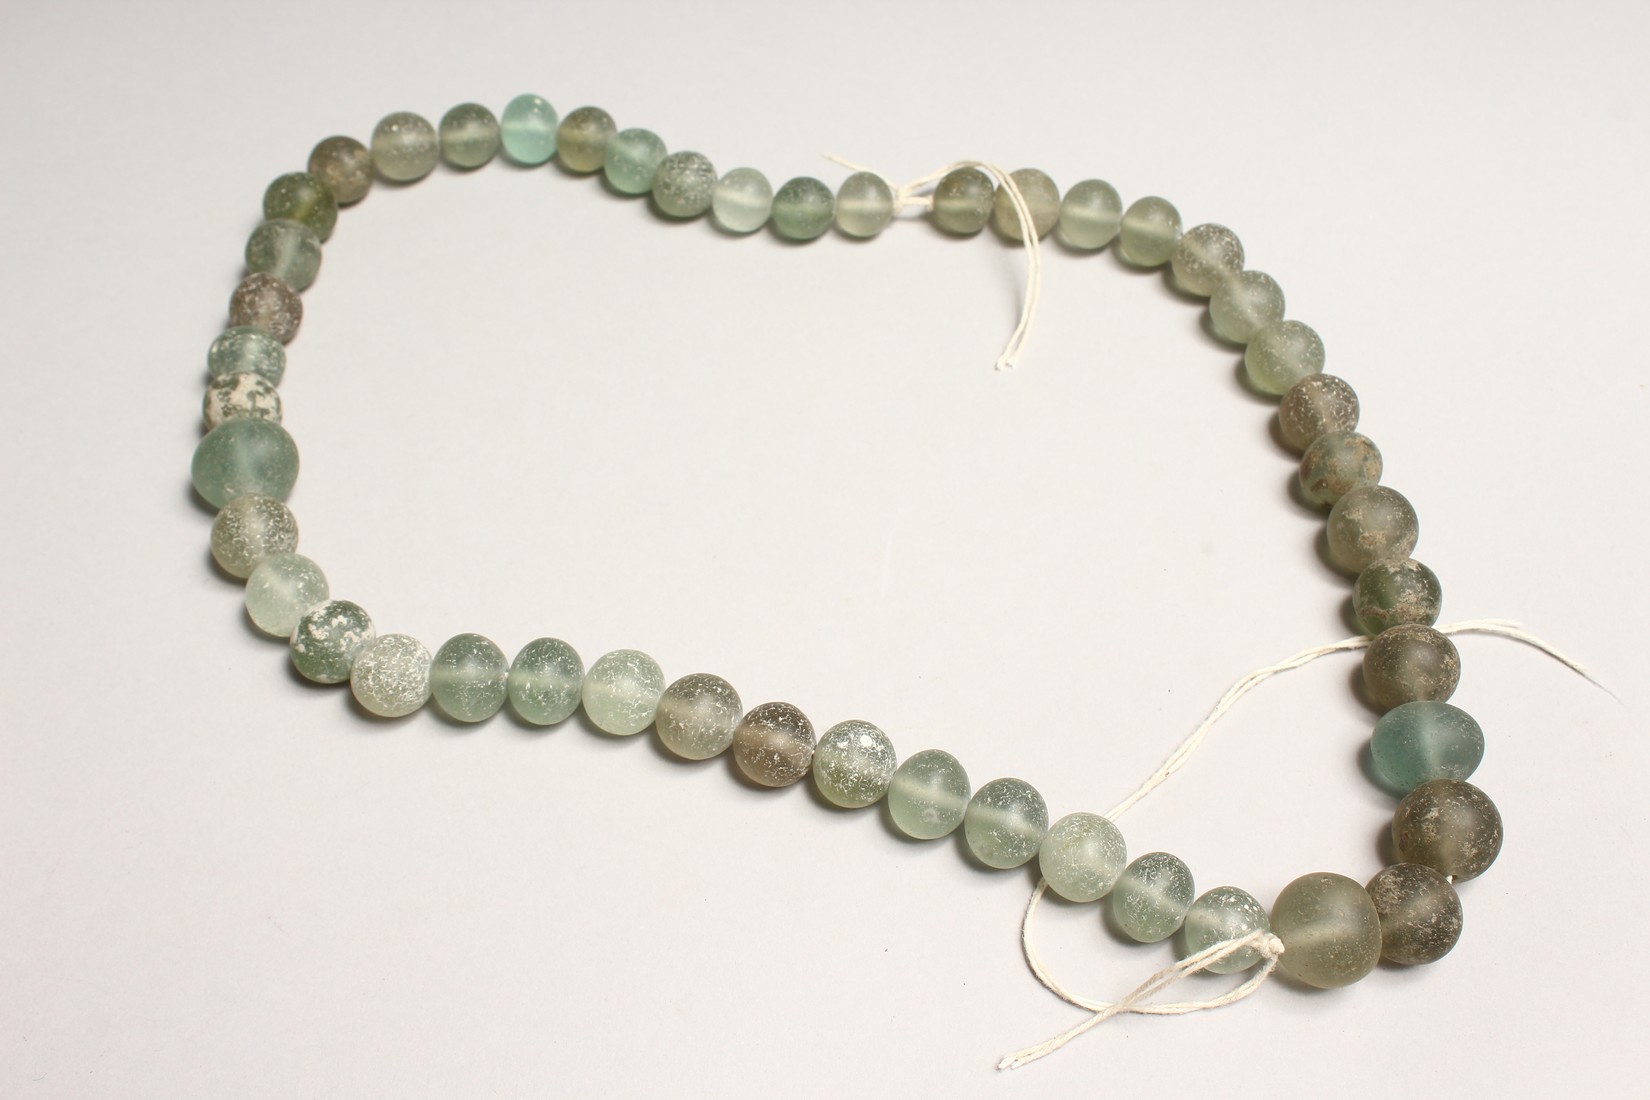 A SHIPWRECK GLASS BEAD NECKLACE - Image 2 of 3